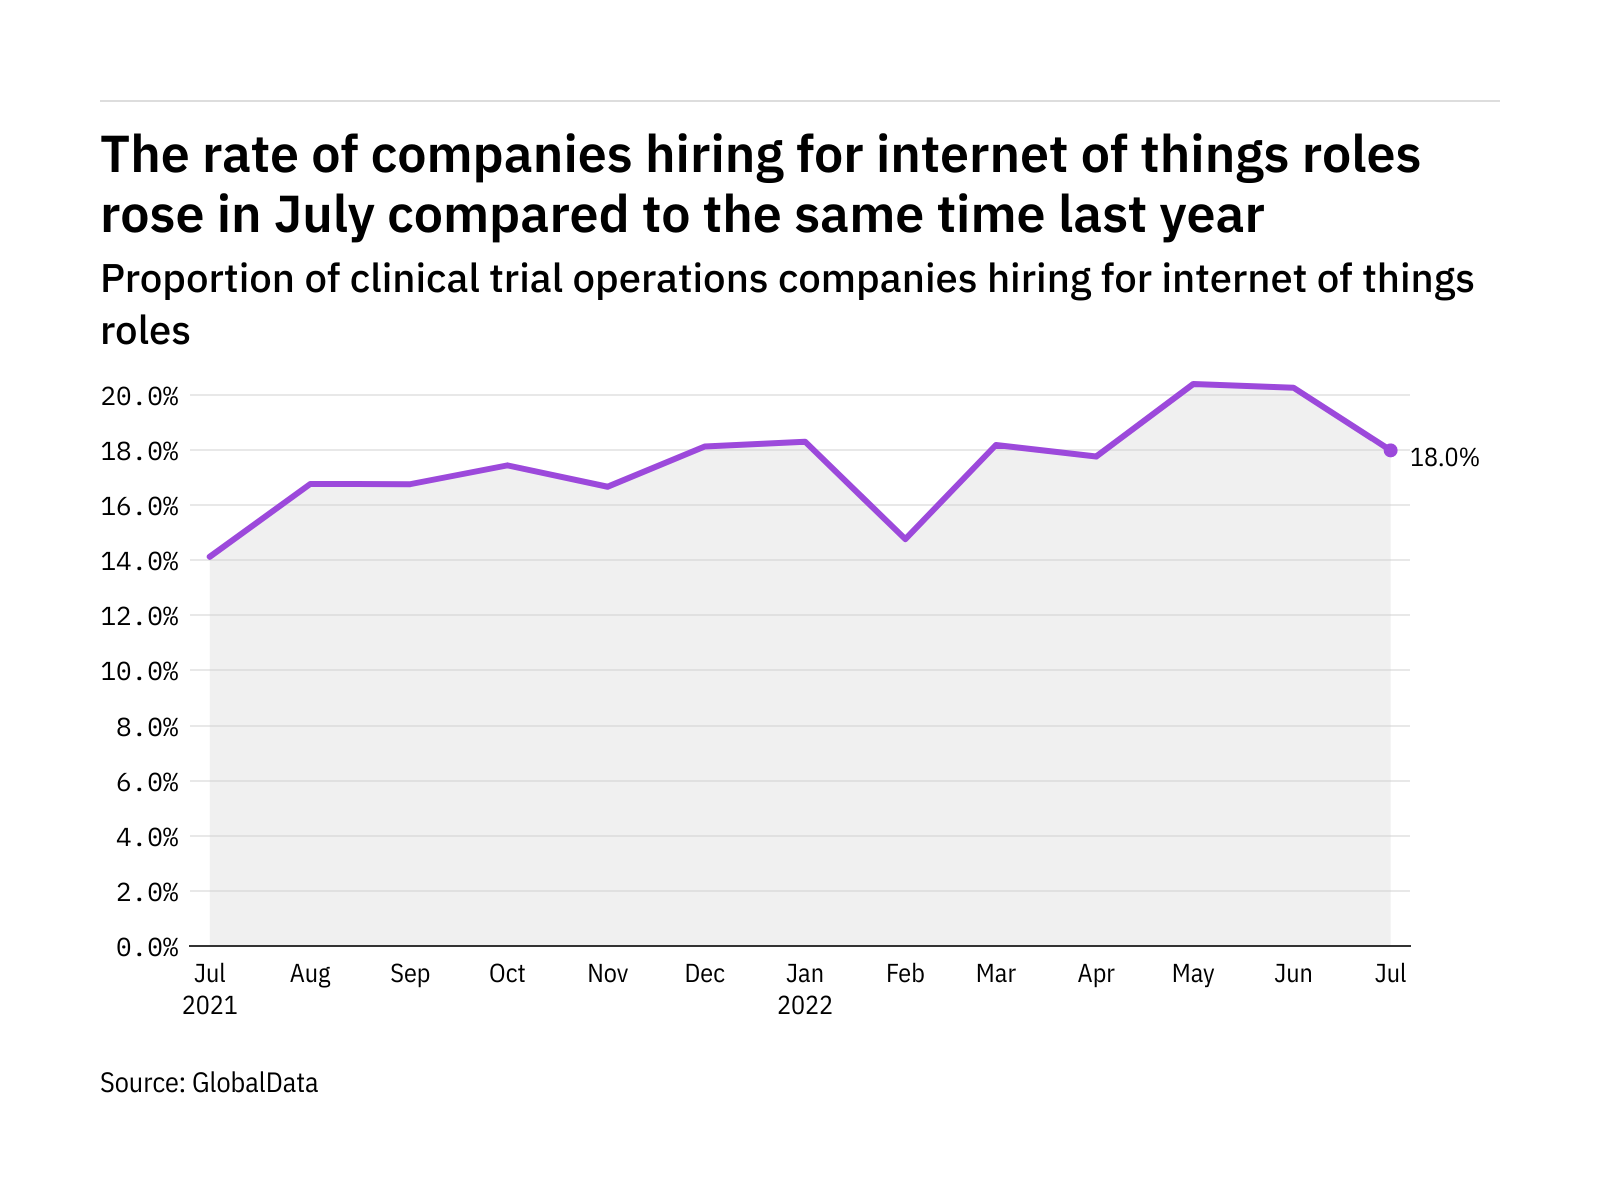 Internet of things hiring in clinical trial operations rose in July 2022